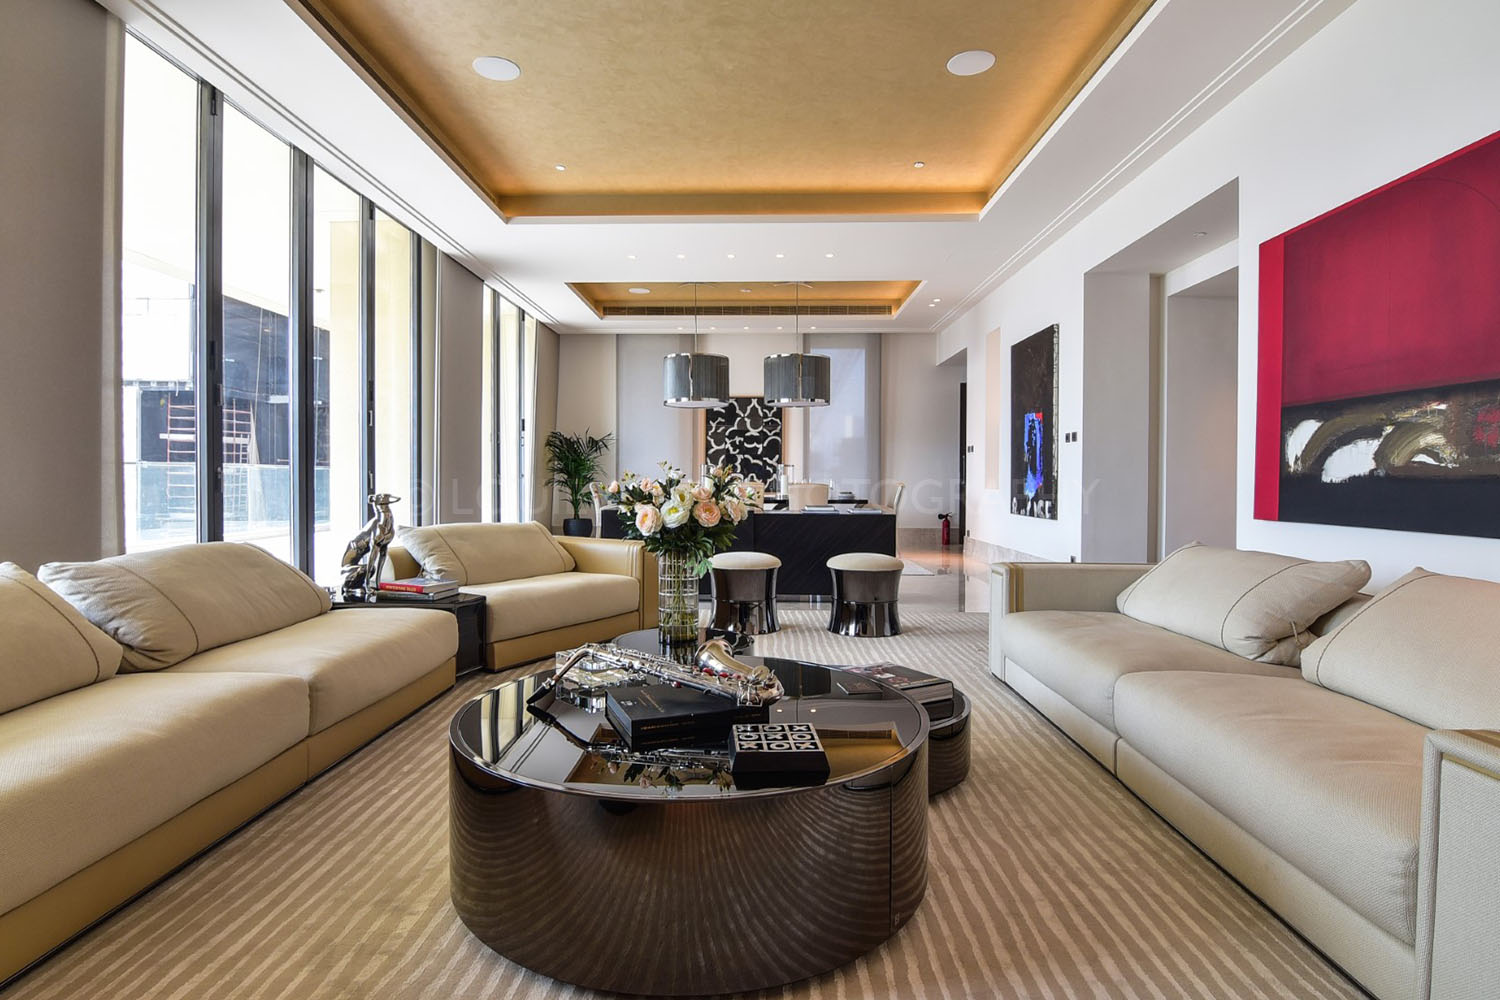 Real Estate Photography - Ultra Luxury Residence in Dubai Downtown